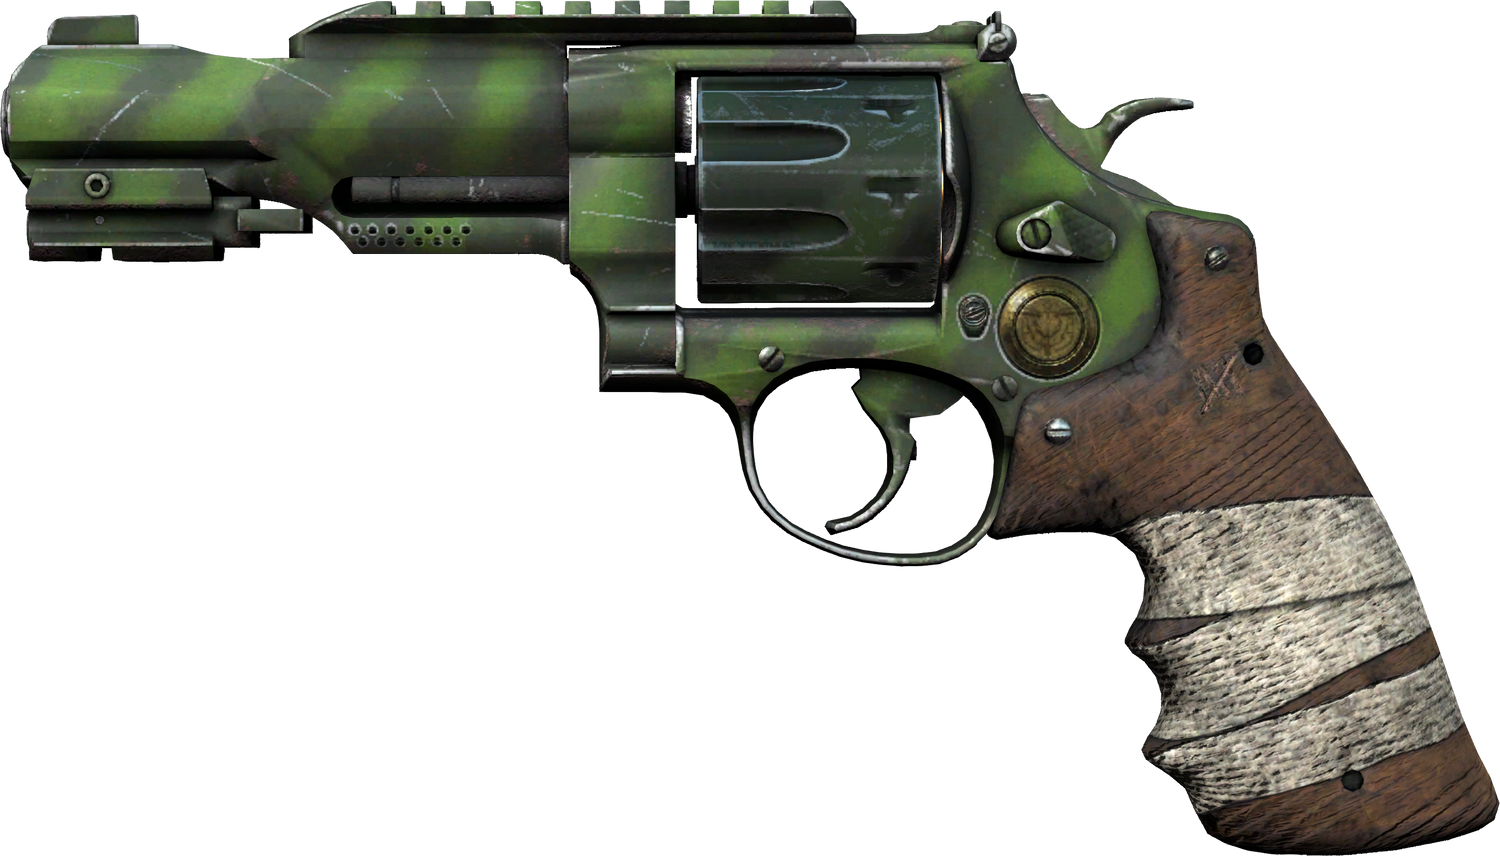 R8 Revolver Canal Spray cs go skin instal the last version for android